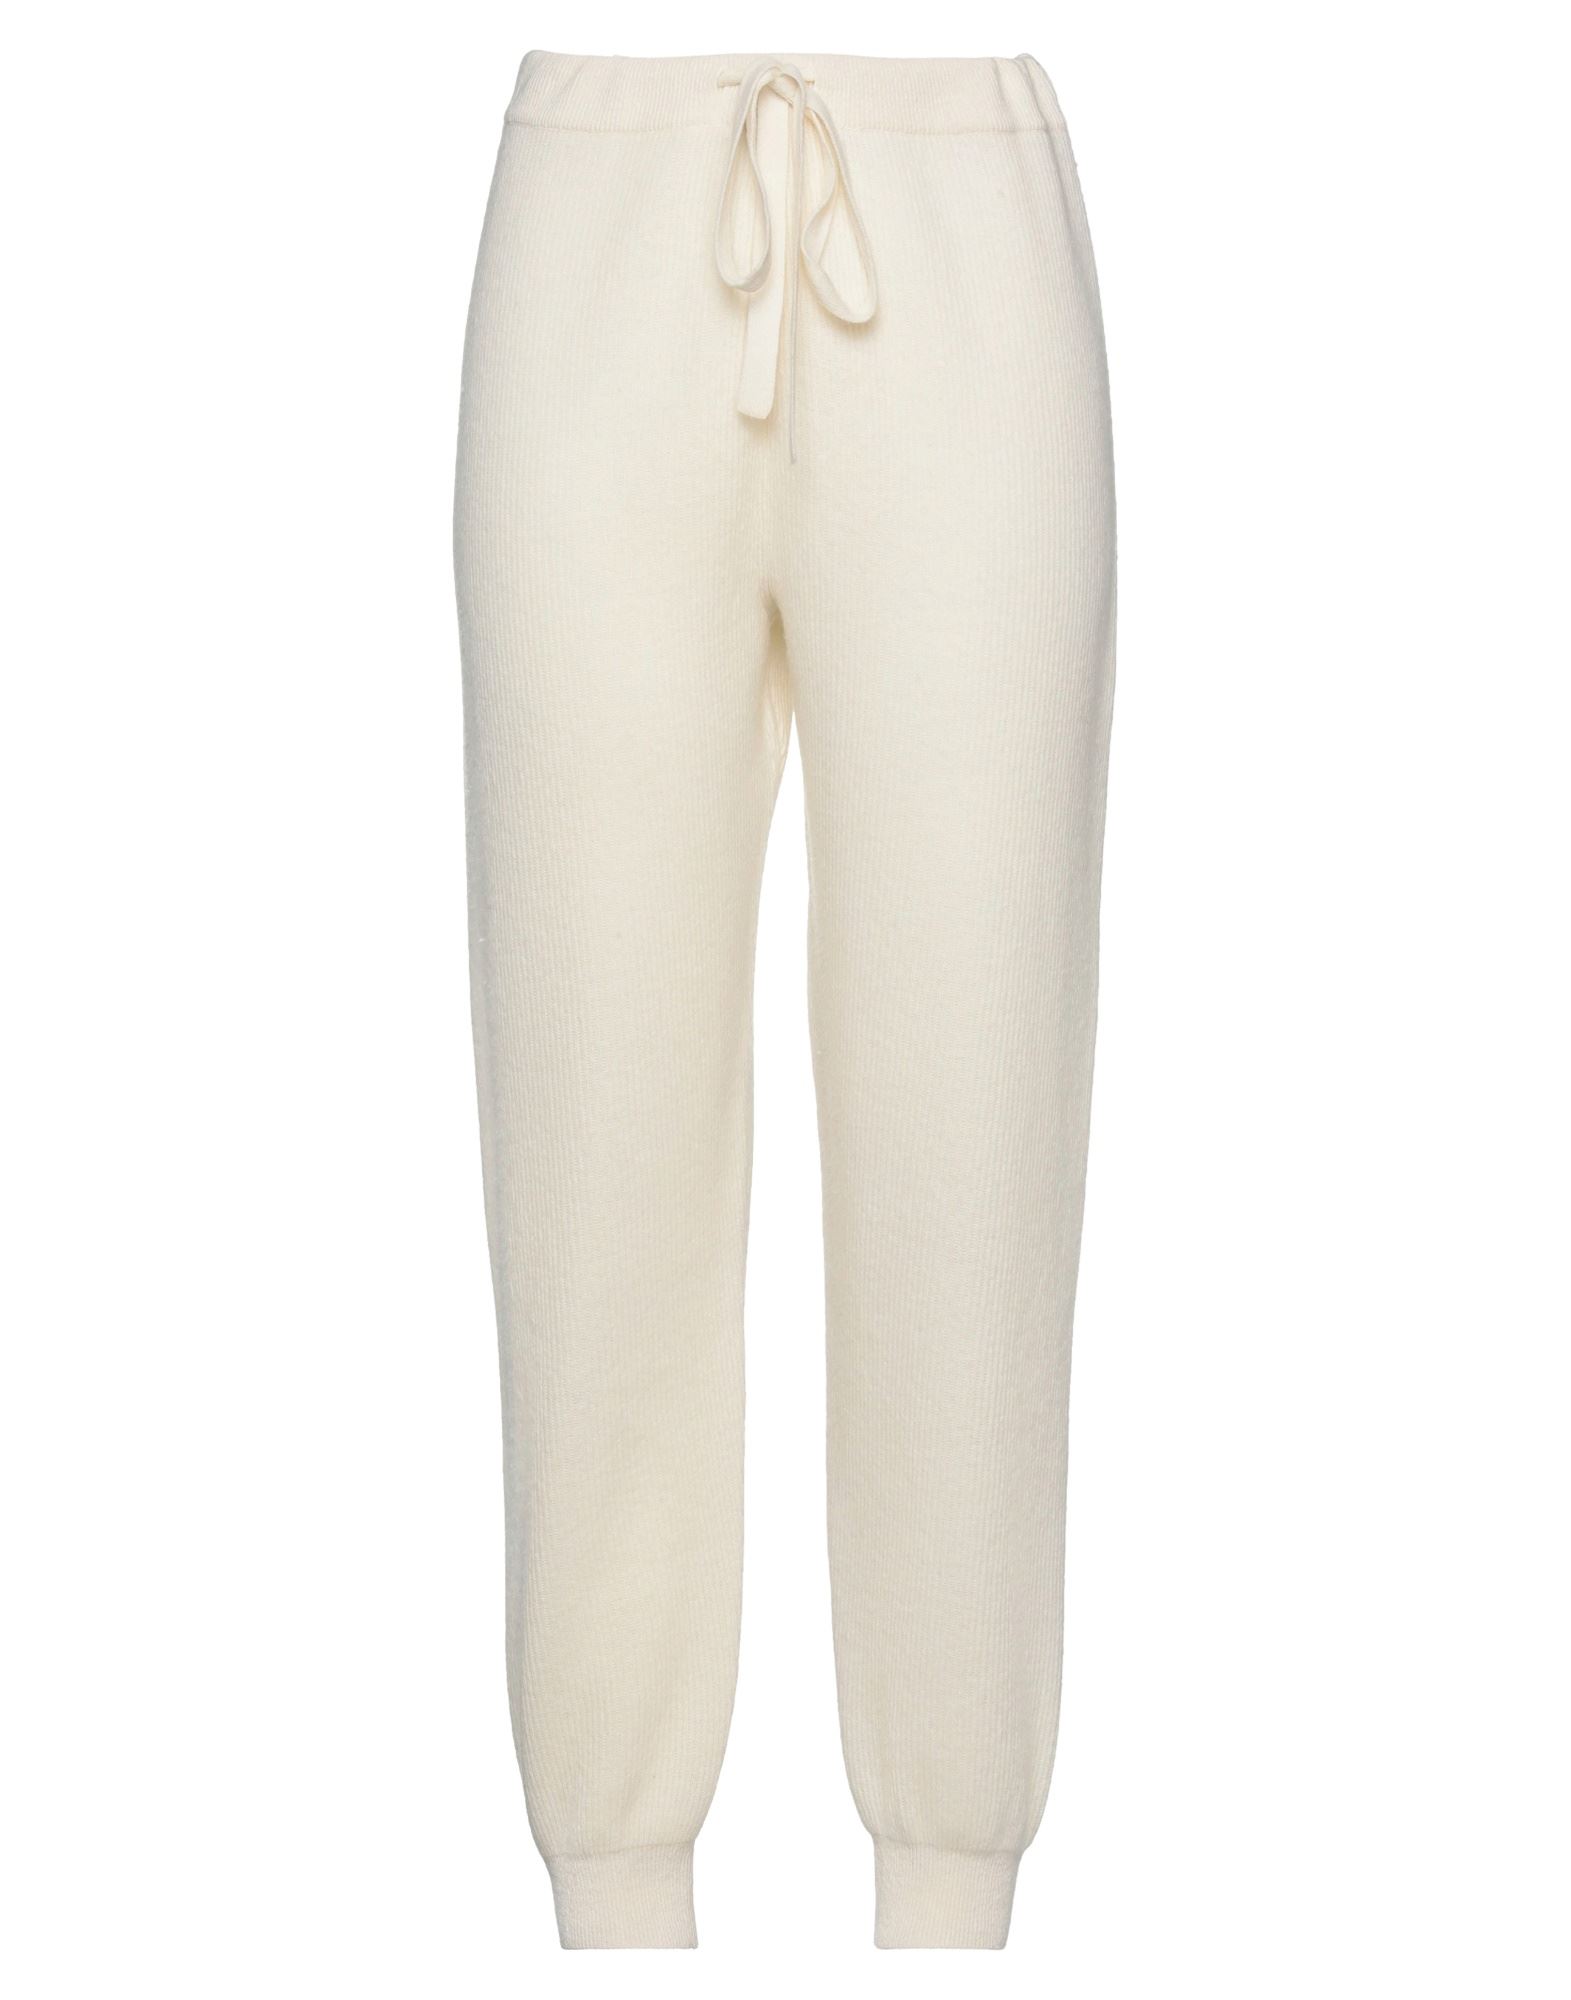 Max & Co Pants In White | ModeSens